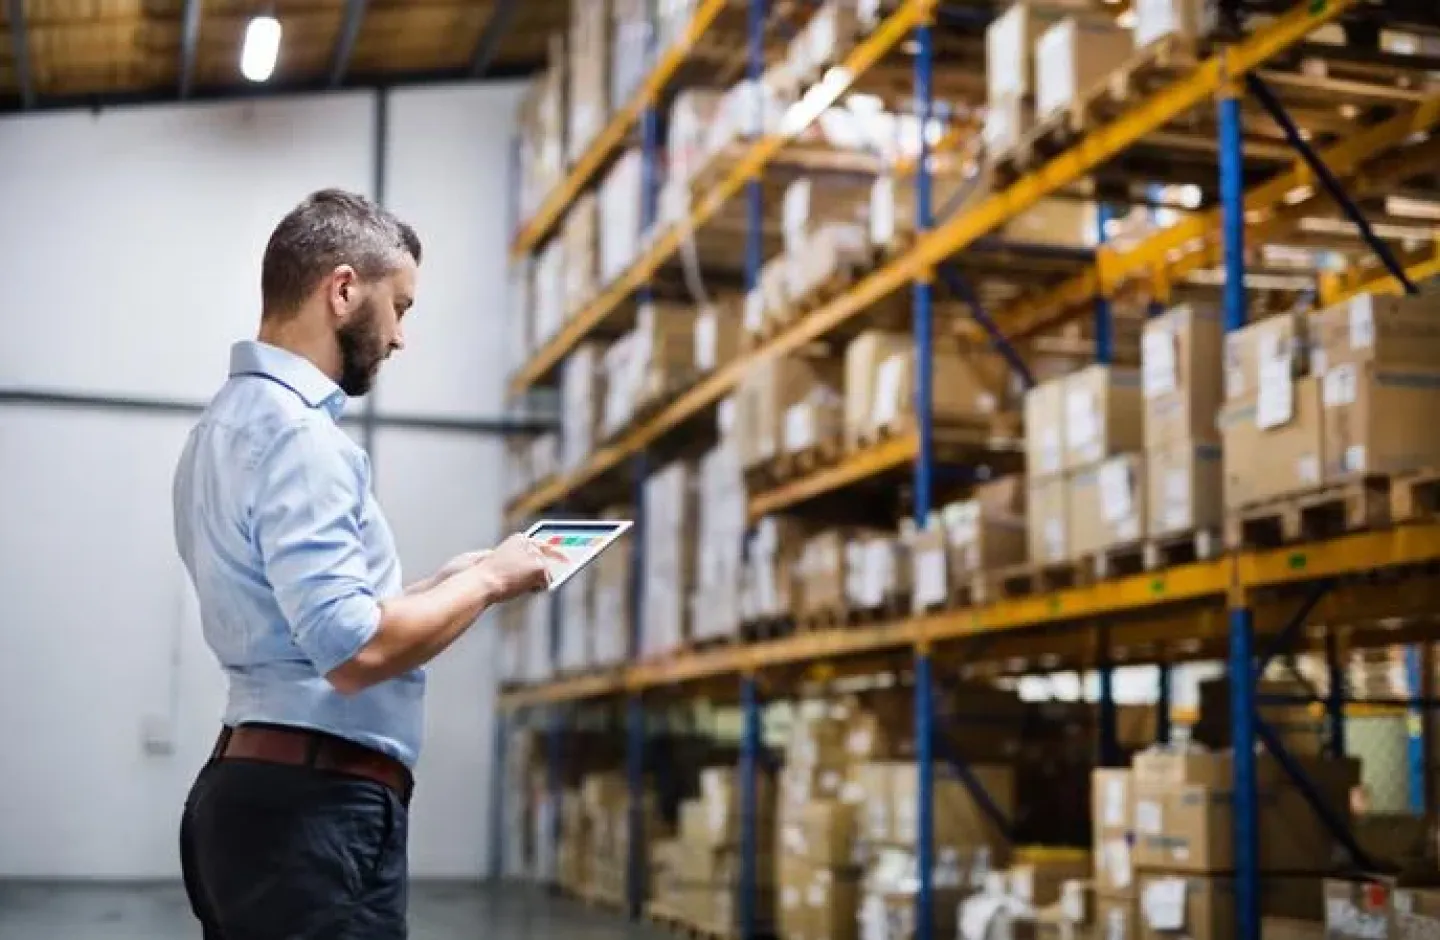 A warehouse manager using technology to manage his warehouse.